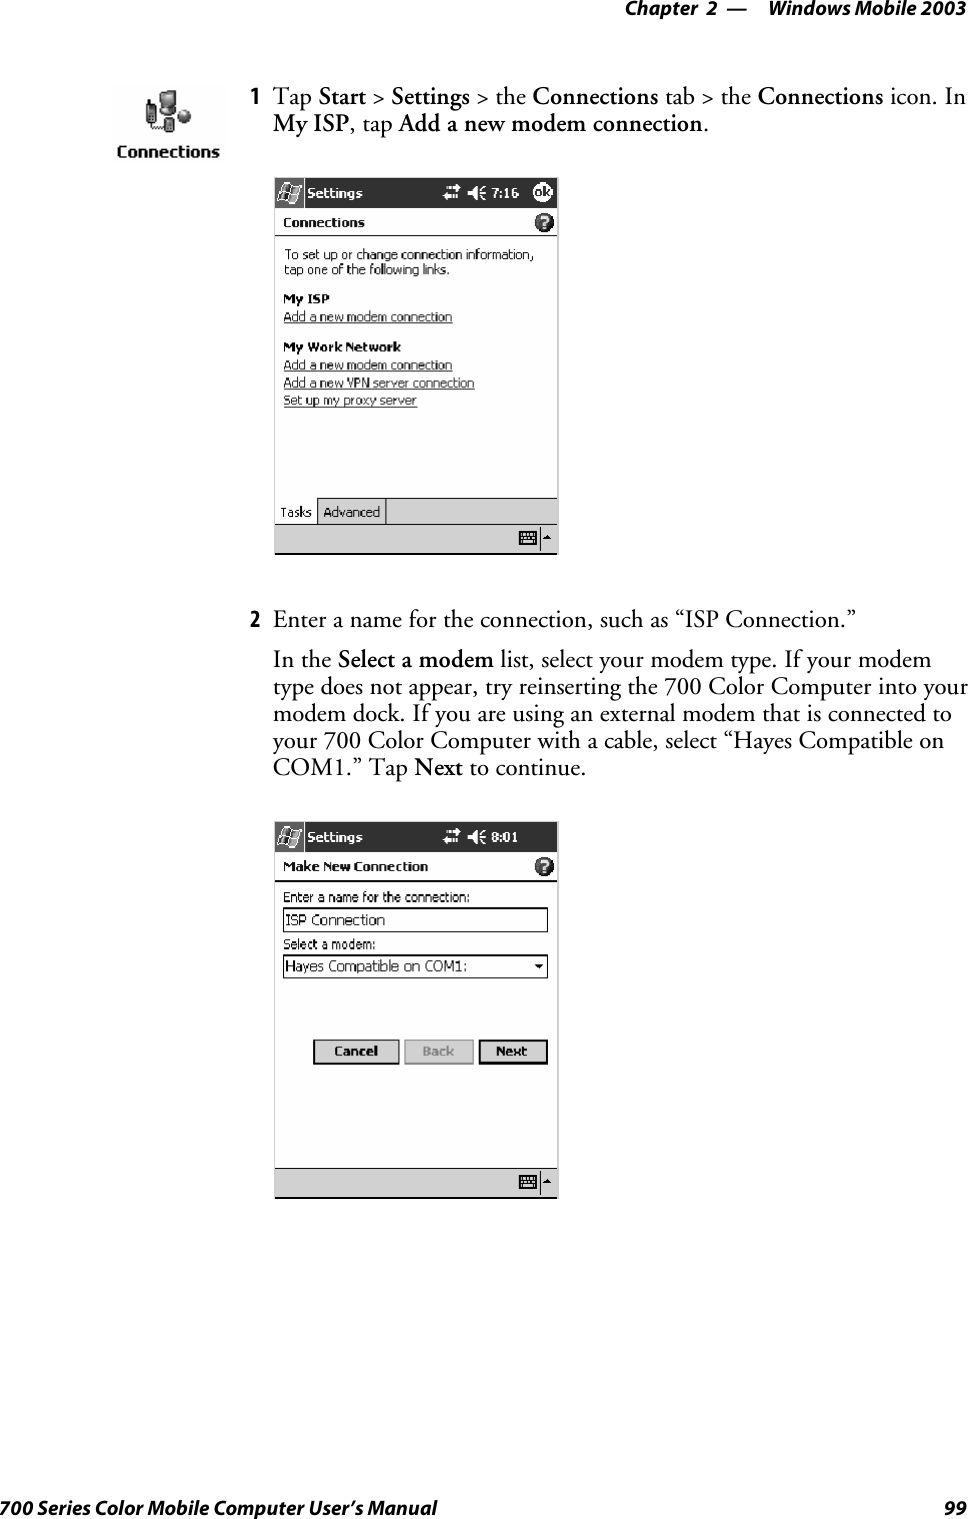 Windows Mobile 2003—Chapter 299700 Series Color Mobile Computer User’s Manual1Tap Start &gt;Settings &gt;theConnections tab&gt;theConnections icon. InMy ISP,tapAdd a new modem connection.2Enter a name for the connection, such as “ISP Connection.”In the Select a modem list, select your modem type. If your modemtype does not appear, try reinserting the 700 Color Computer into yourmodem dock. If you are using an external modem that is connected toyour 700 Color Computer with a cable, select “Hayes Compatible onCOM1.” Tap Next to continue.